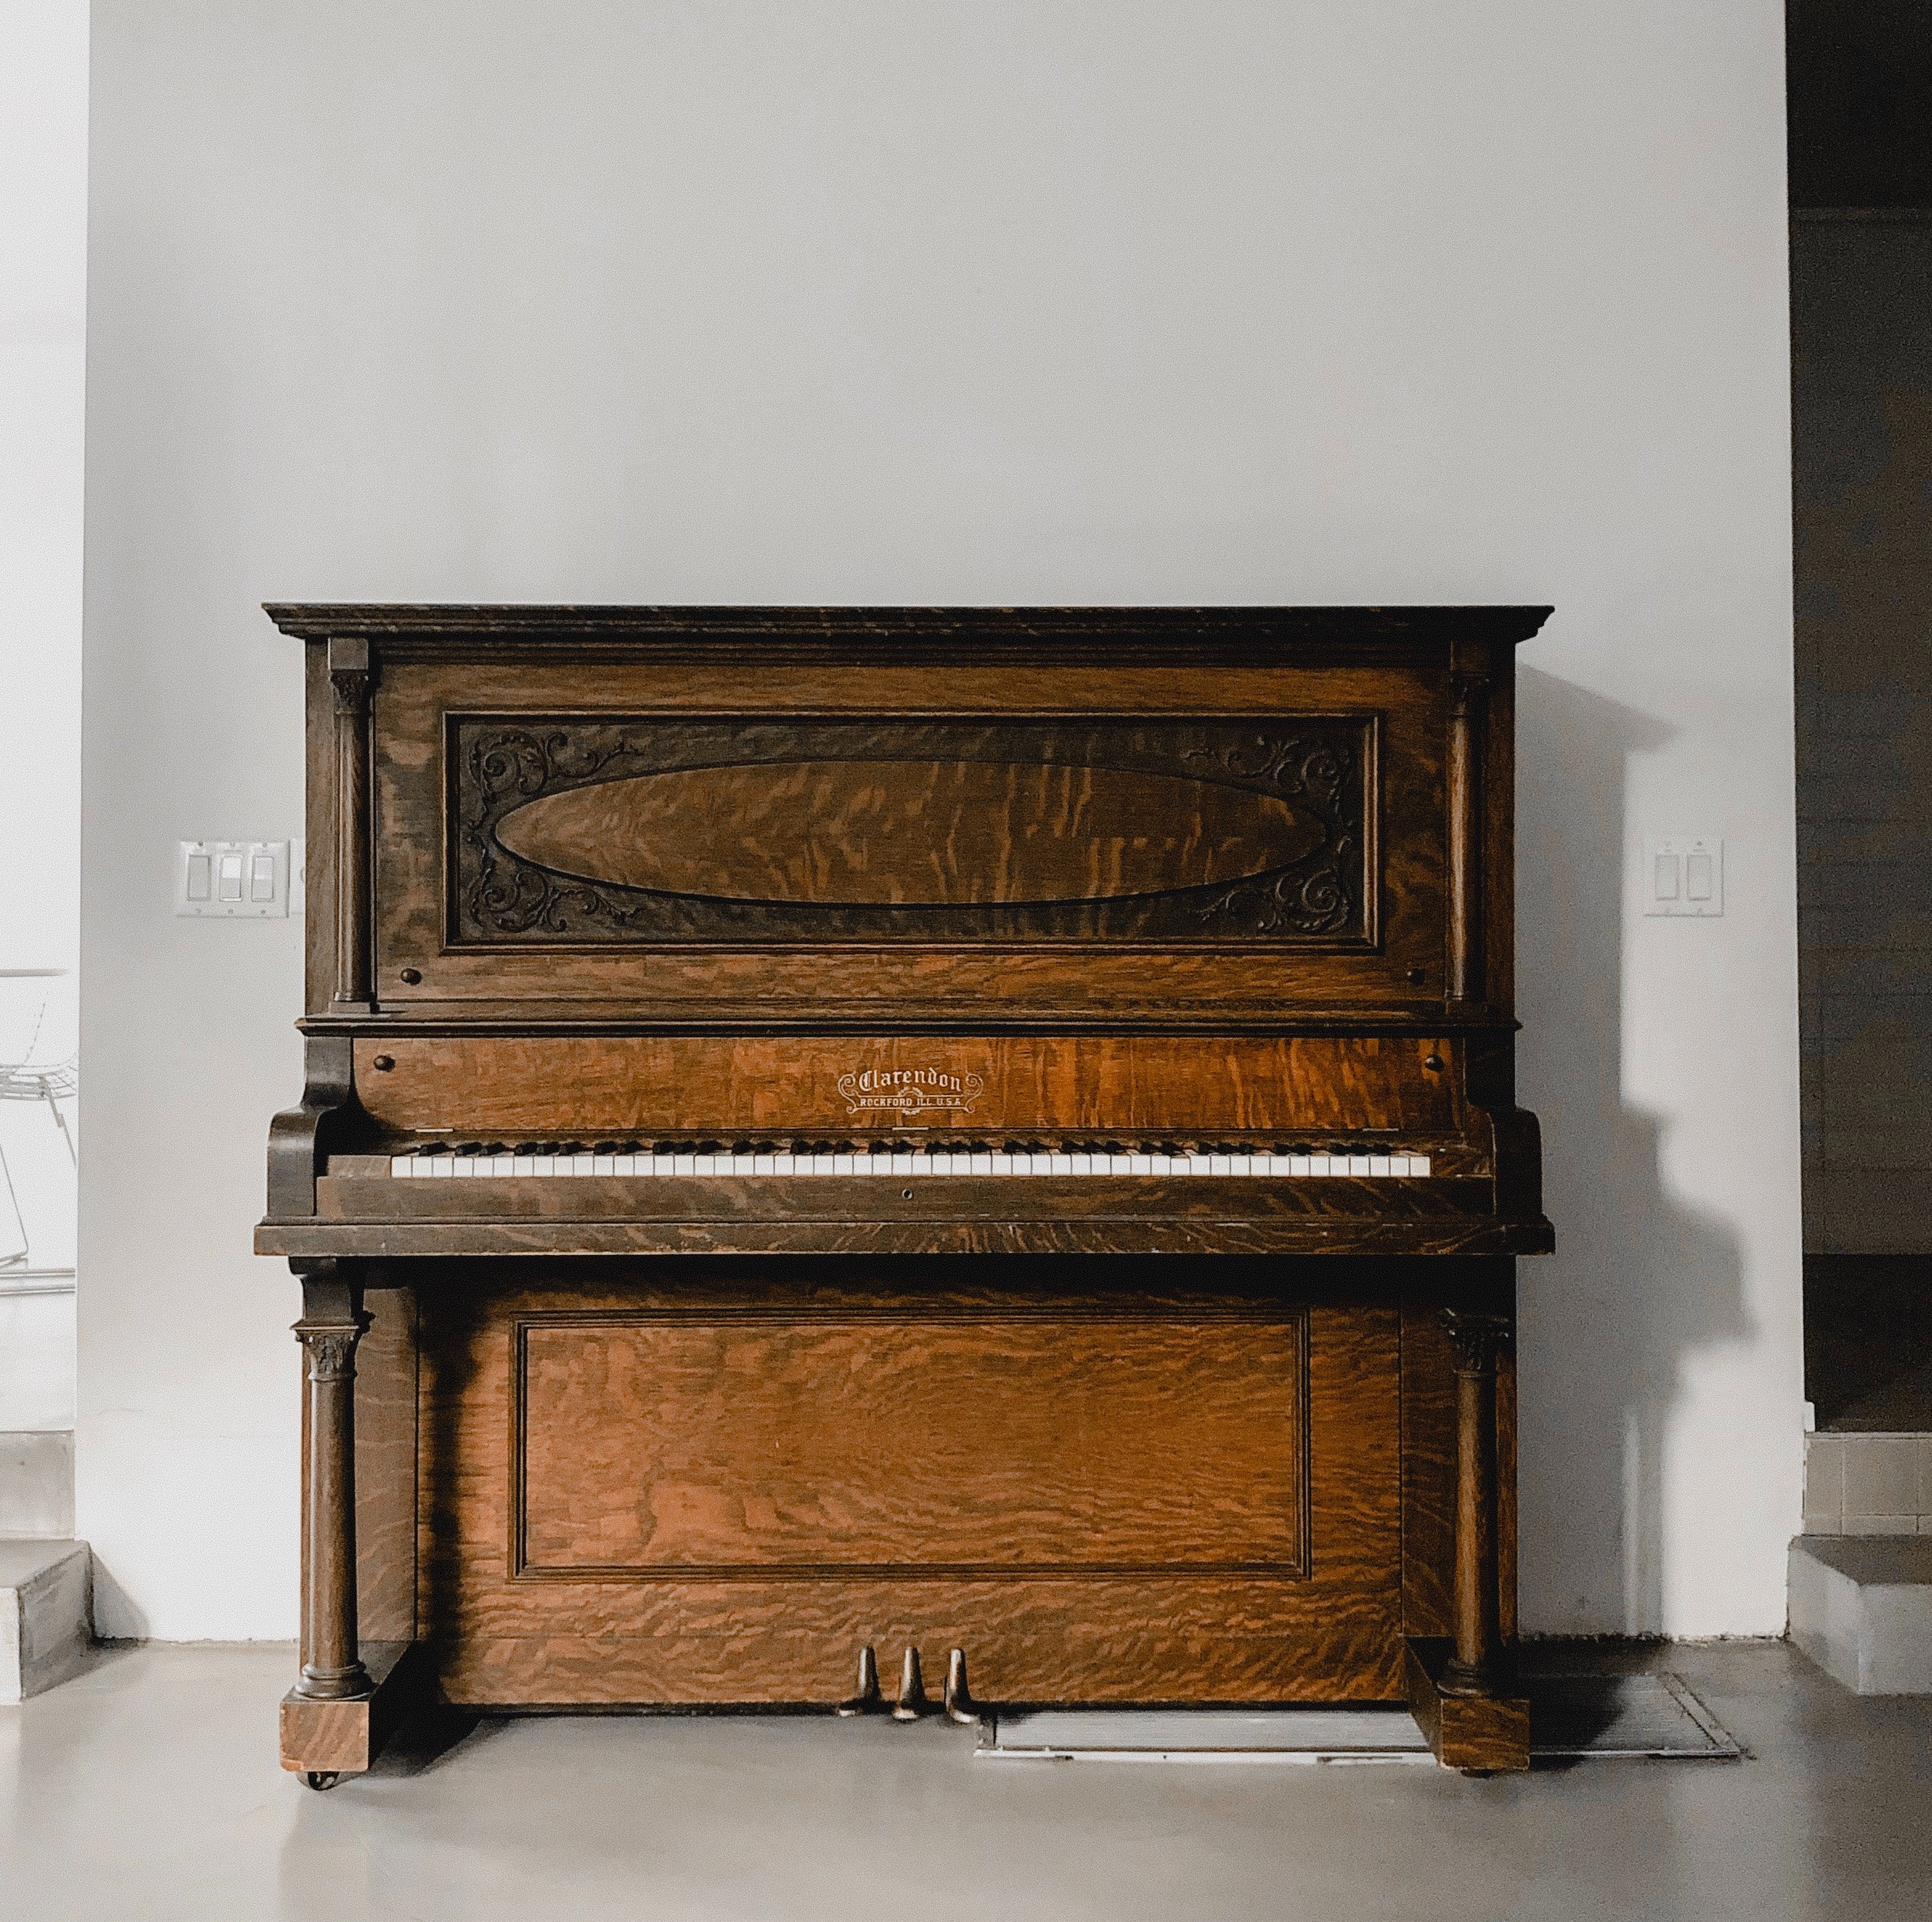 A piano collecting dust